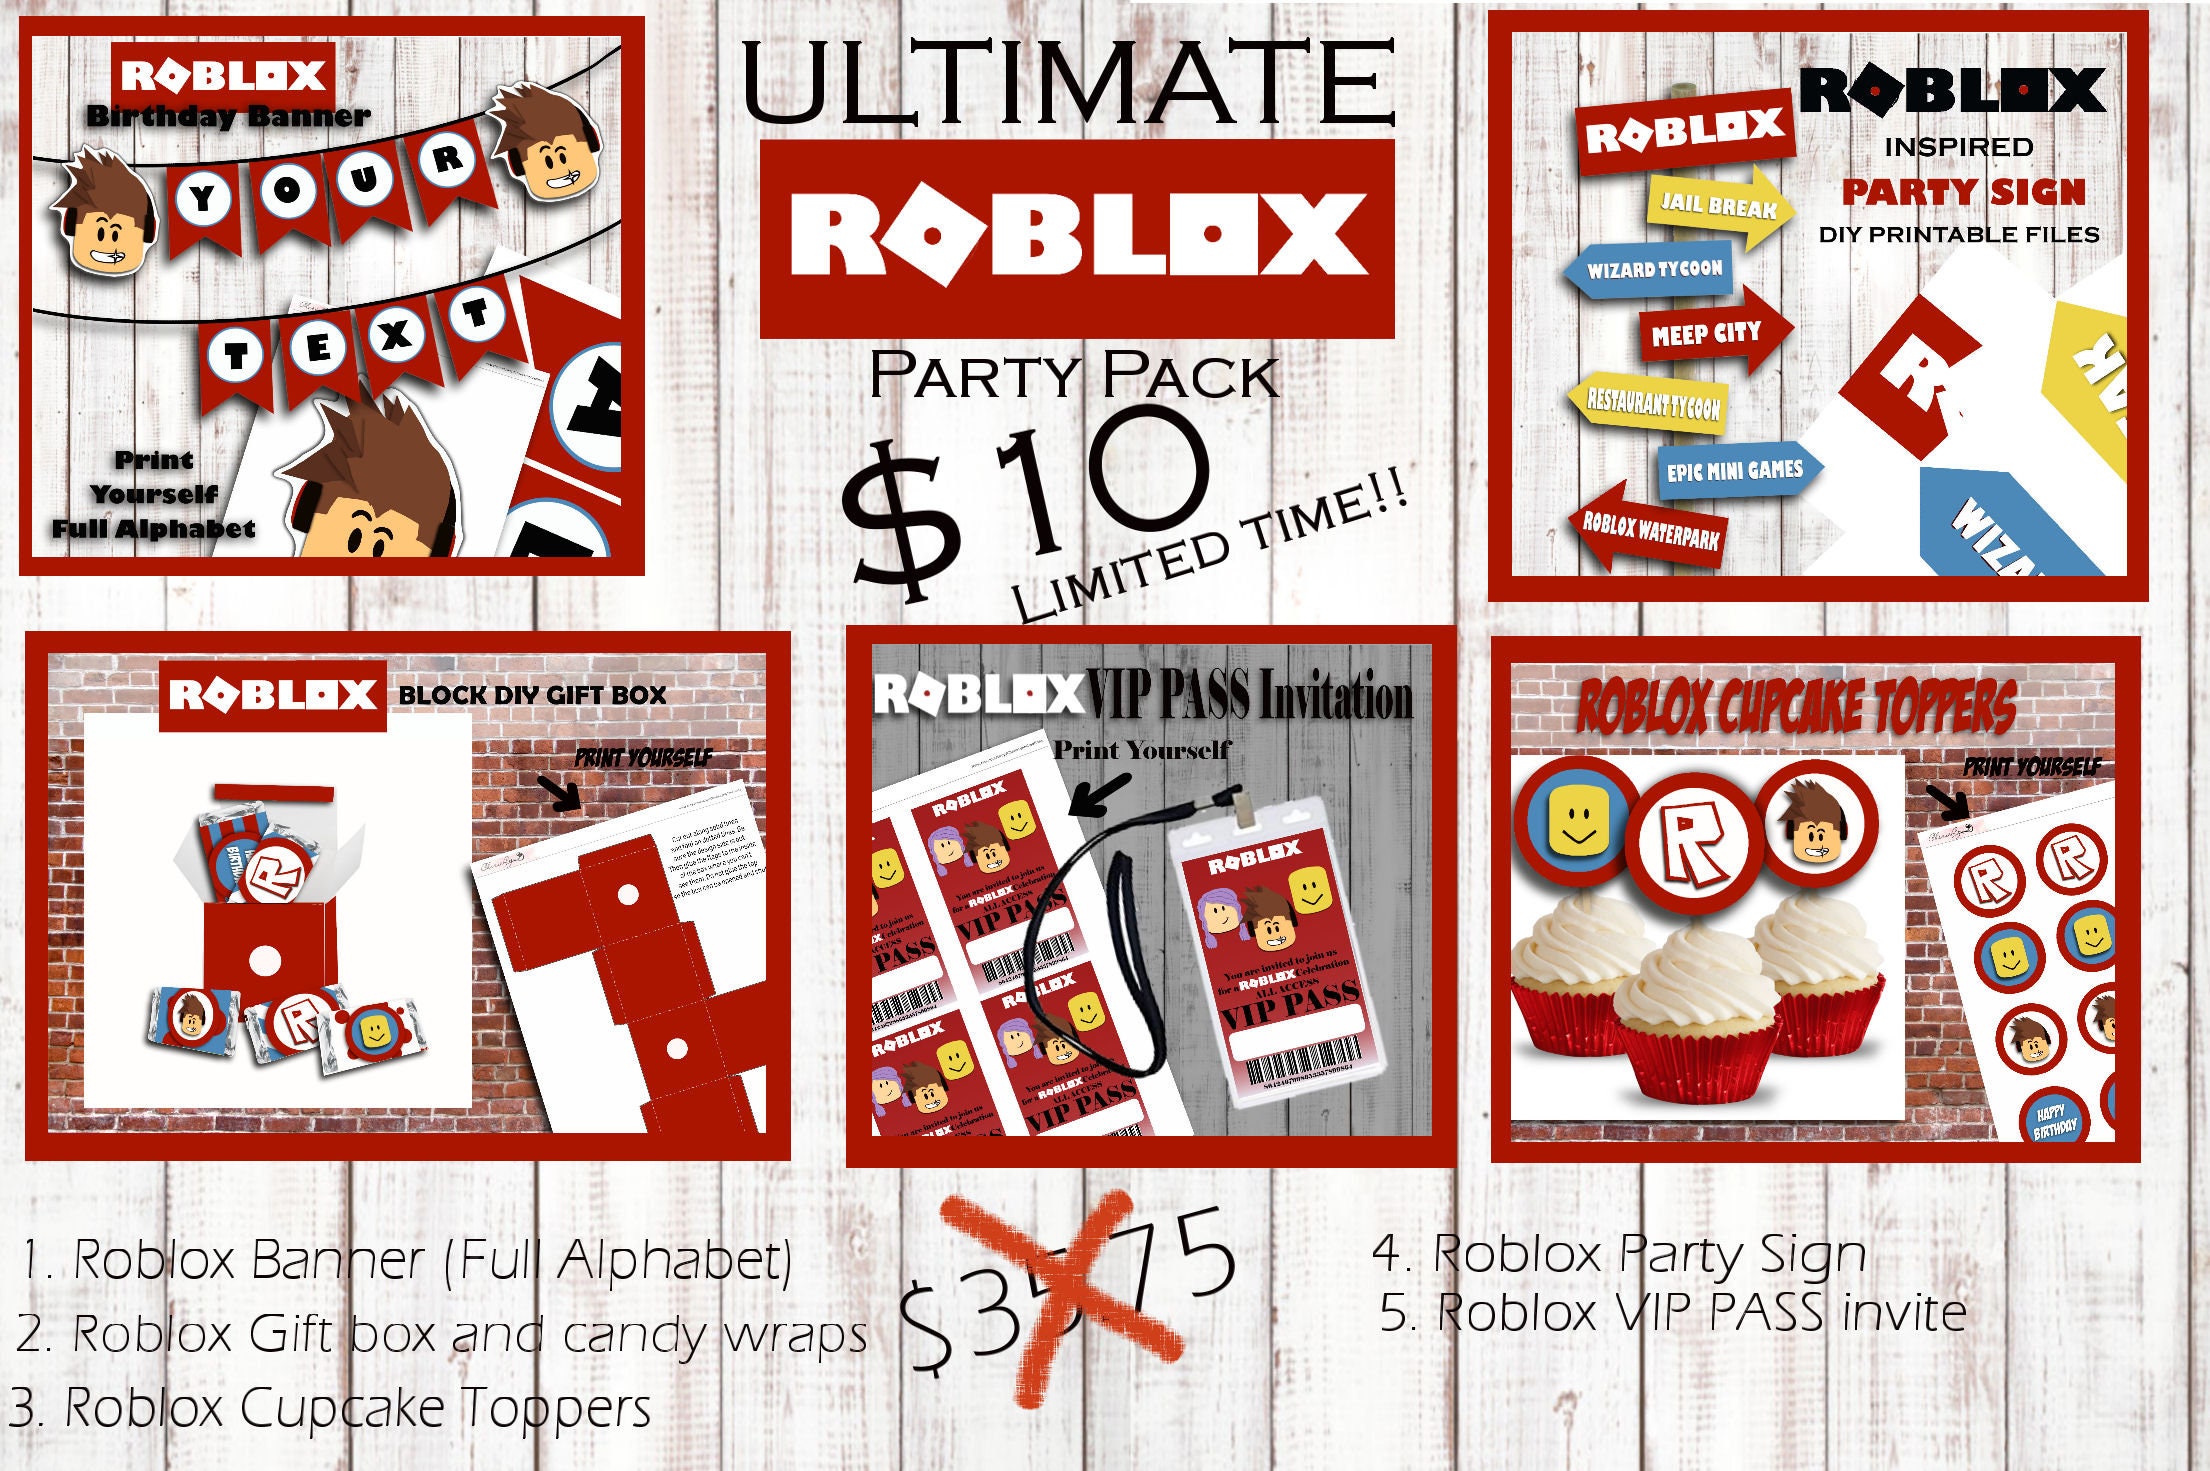 How To Get Free T Shirts On Roblox Dreamworks - how to get free t shirts no bc needed roblox